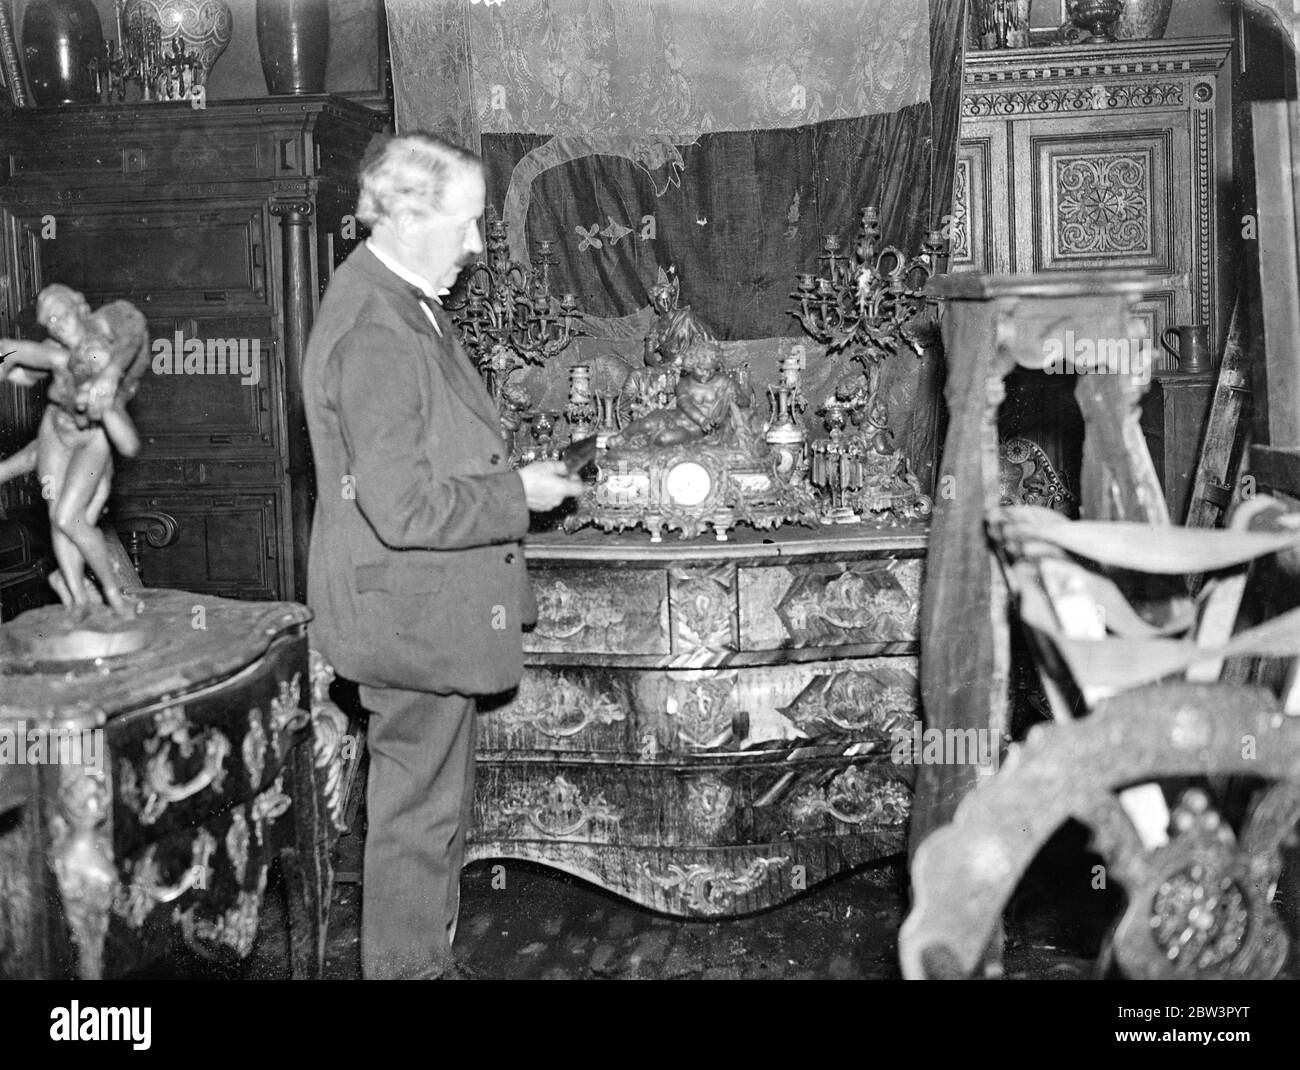 Art treasures and antiques ruined in Hampstead fire , Willoughby Road . Mr Ernest Stamp inspecting some of his damaged antiques , including a Louis XIV commode . 7 August 1935 Stock Photo